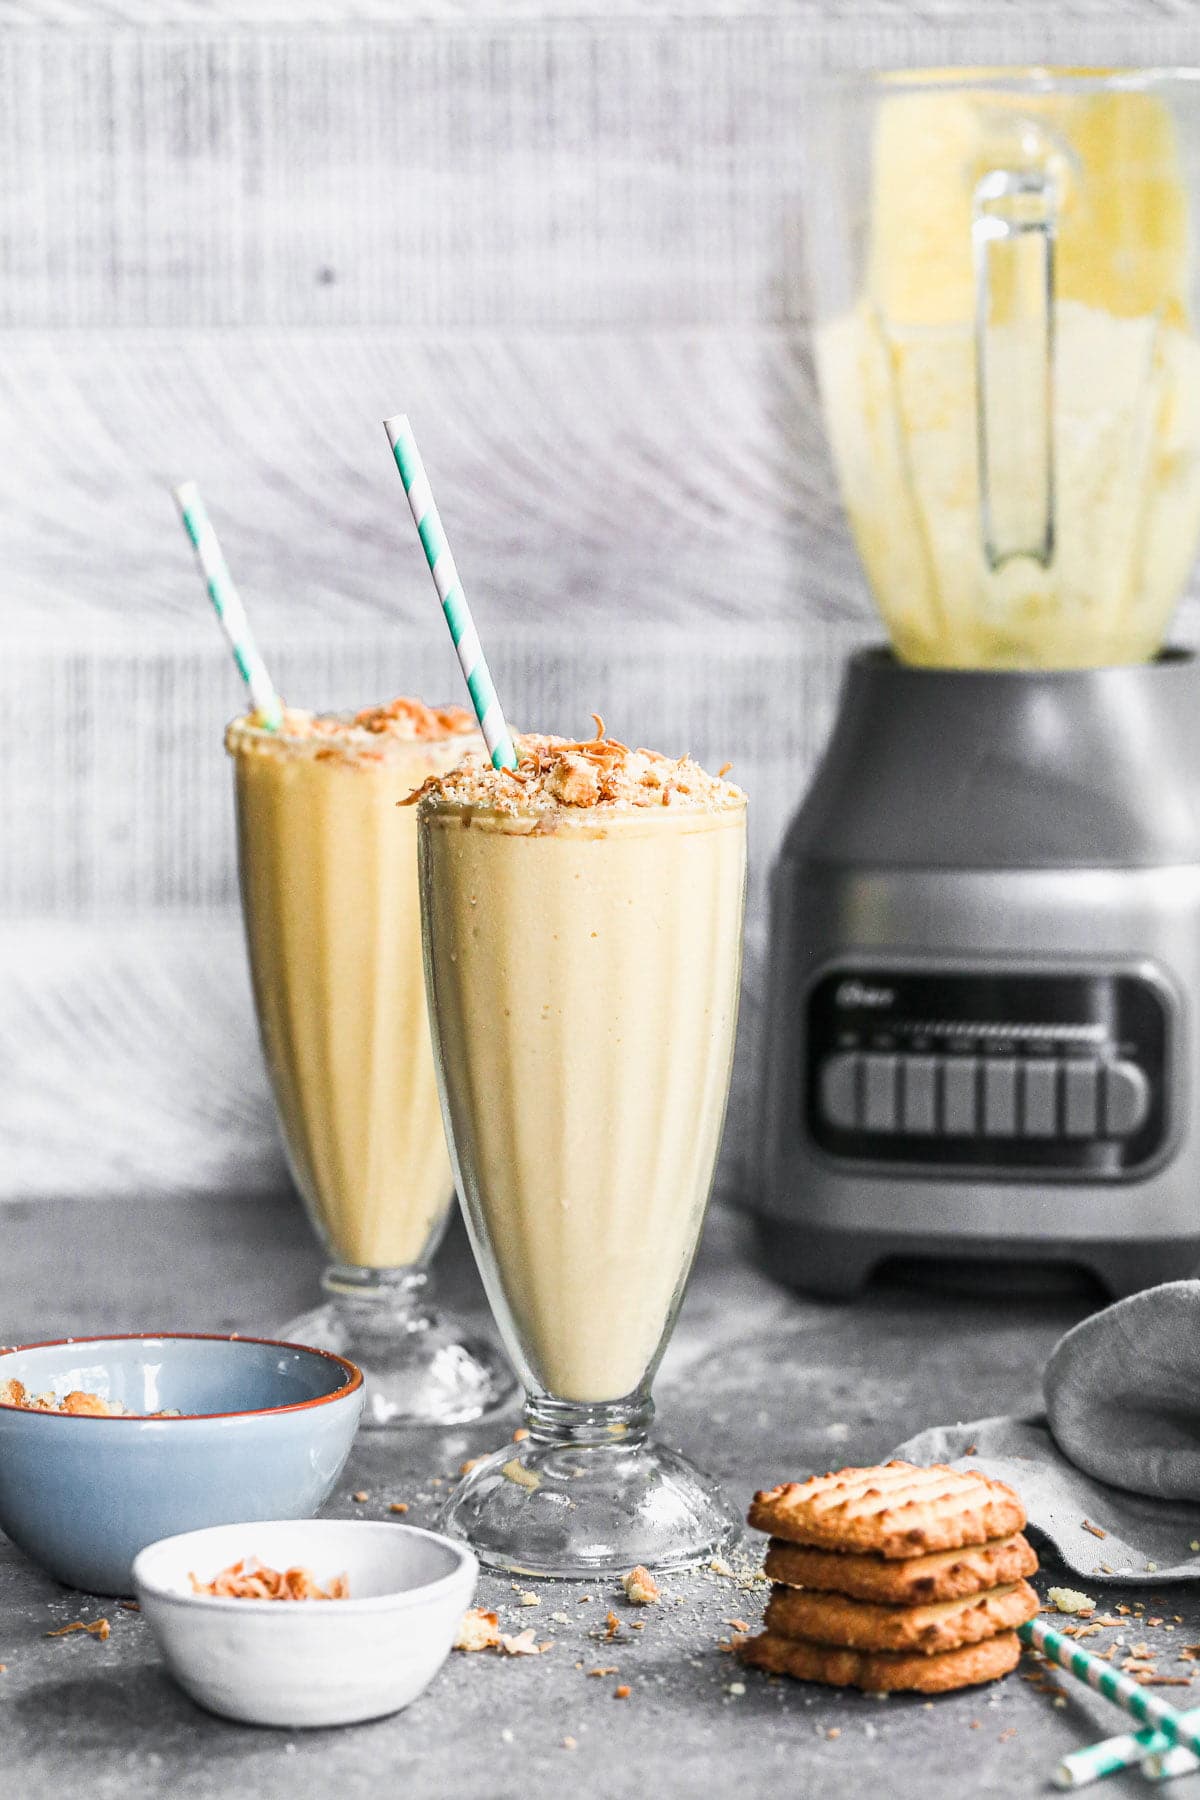 We're celebrating Oster's 75th Blending Anniversary with a Tropical Smoothie worthy of any special occasion. Filled with all your favorite tropical flavors - pineapple, mango, and coconut - this easy-to-throw-together smoothie turned dessert is irresistibly sweet, brimming with beach vibes and here to party. We top each ultra smooth, cold smoothie with toasted coconut and crushed shortbread cookies for the perfect play on texture. Don't miss this one!&nbsp;